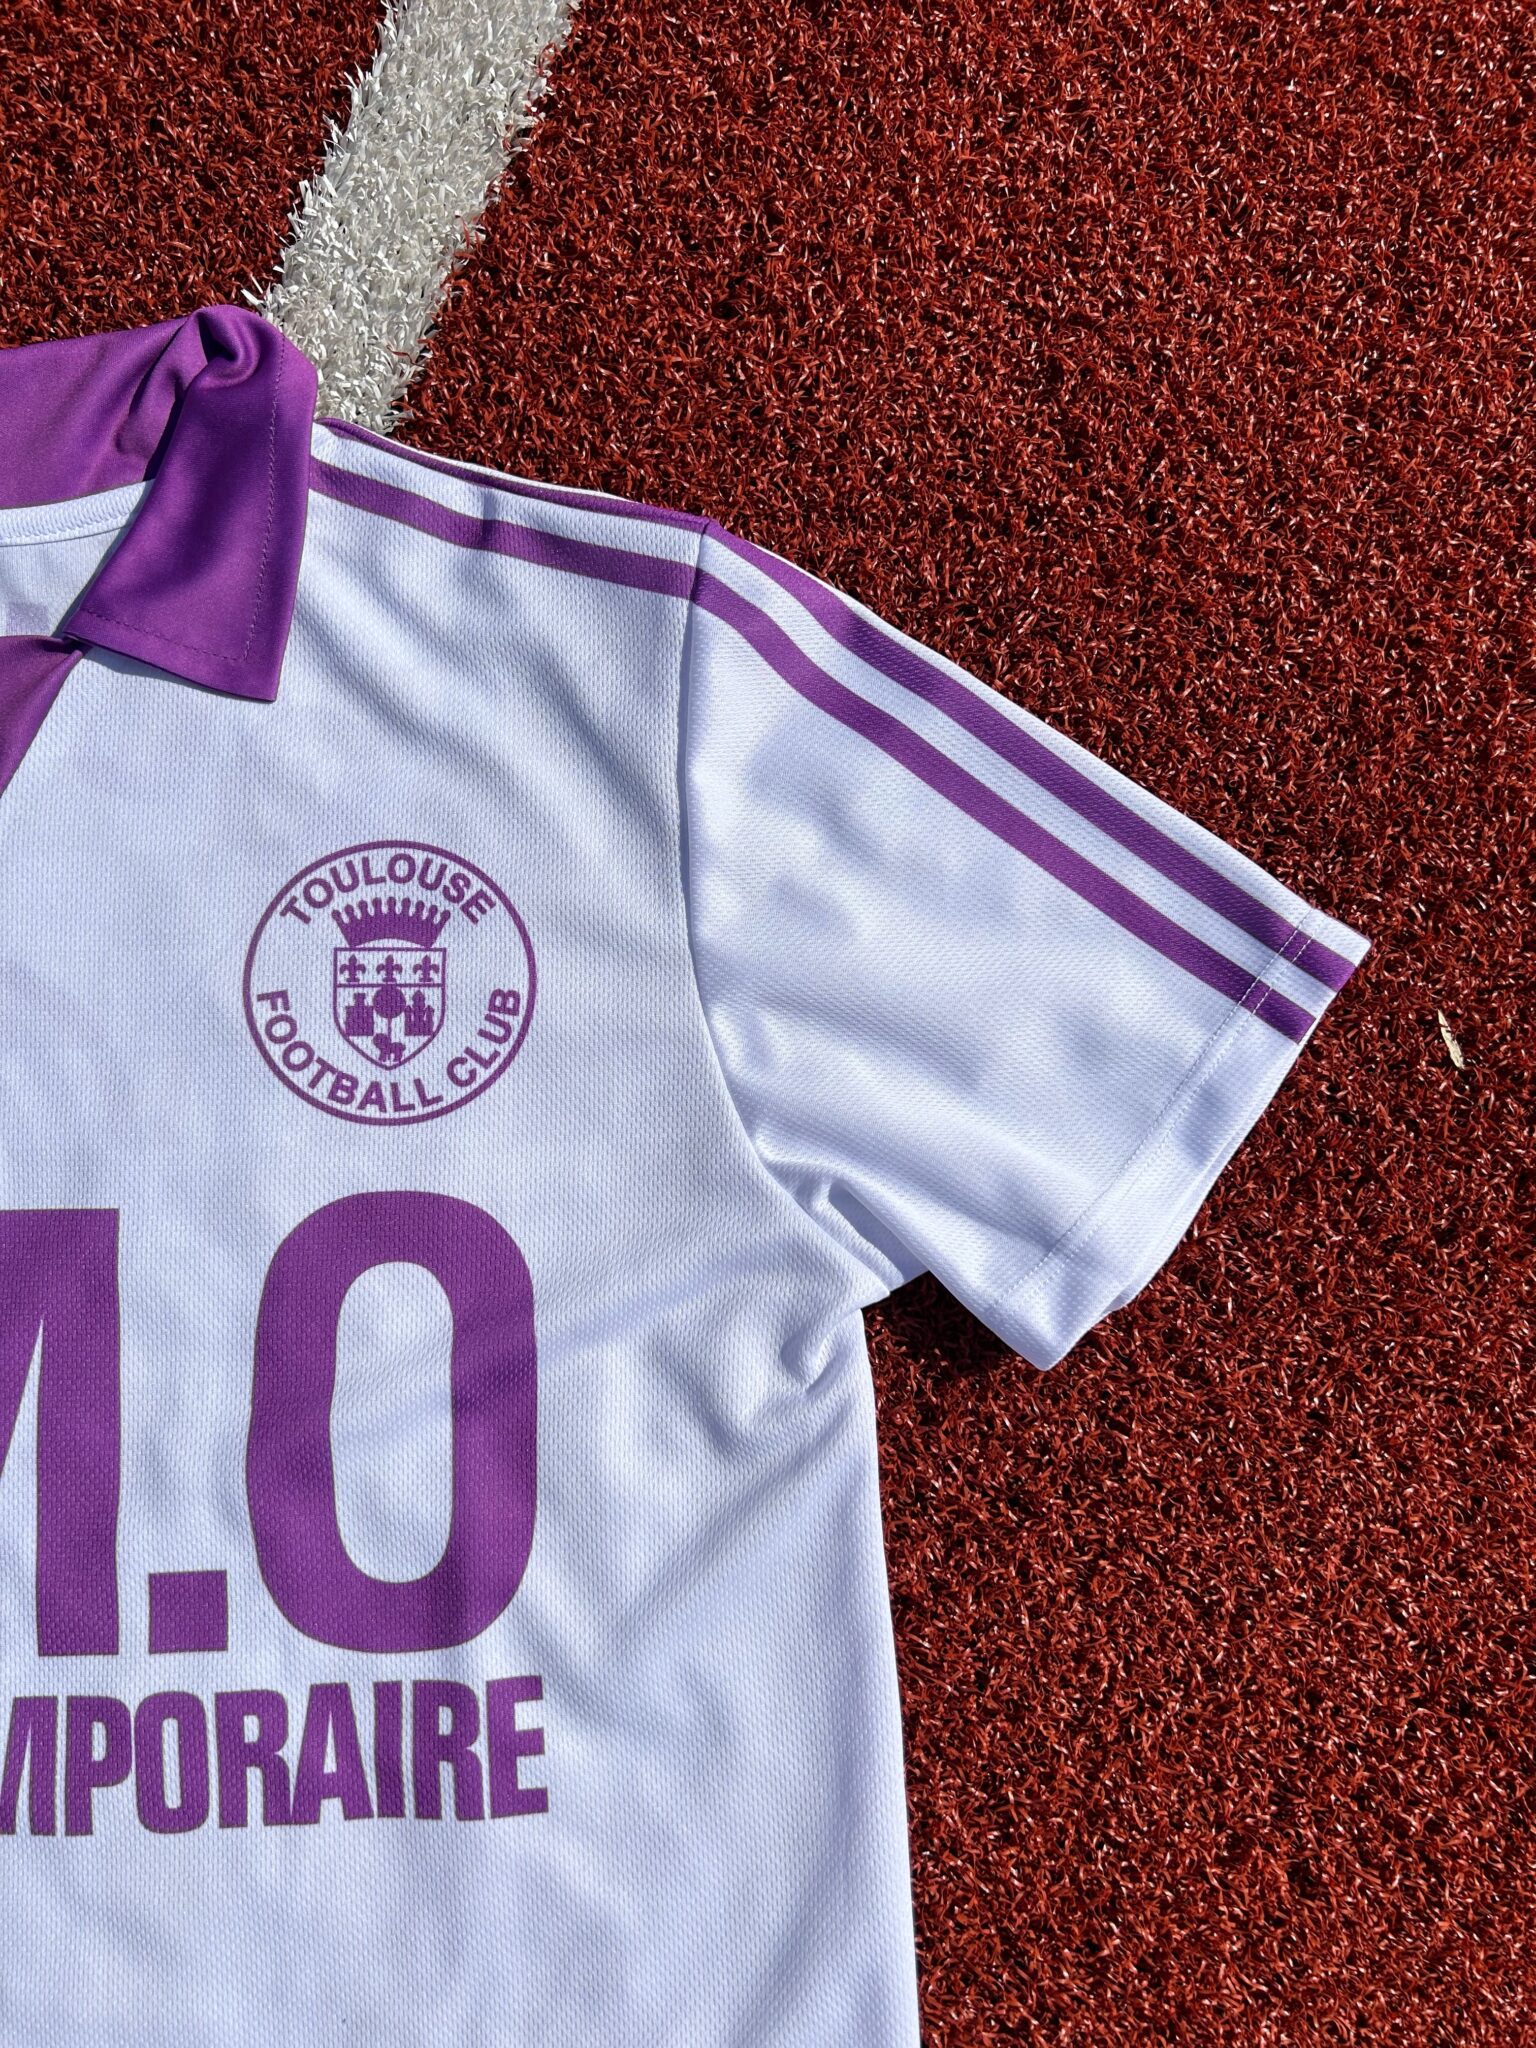 FC Toulouse Football Shirt 1982/1983 Away TFC Retro Maillot Vintage Jersey France R.M.O - Sport Club Memories